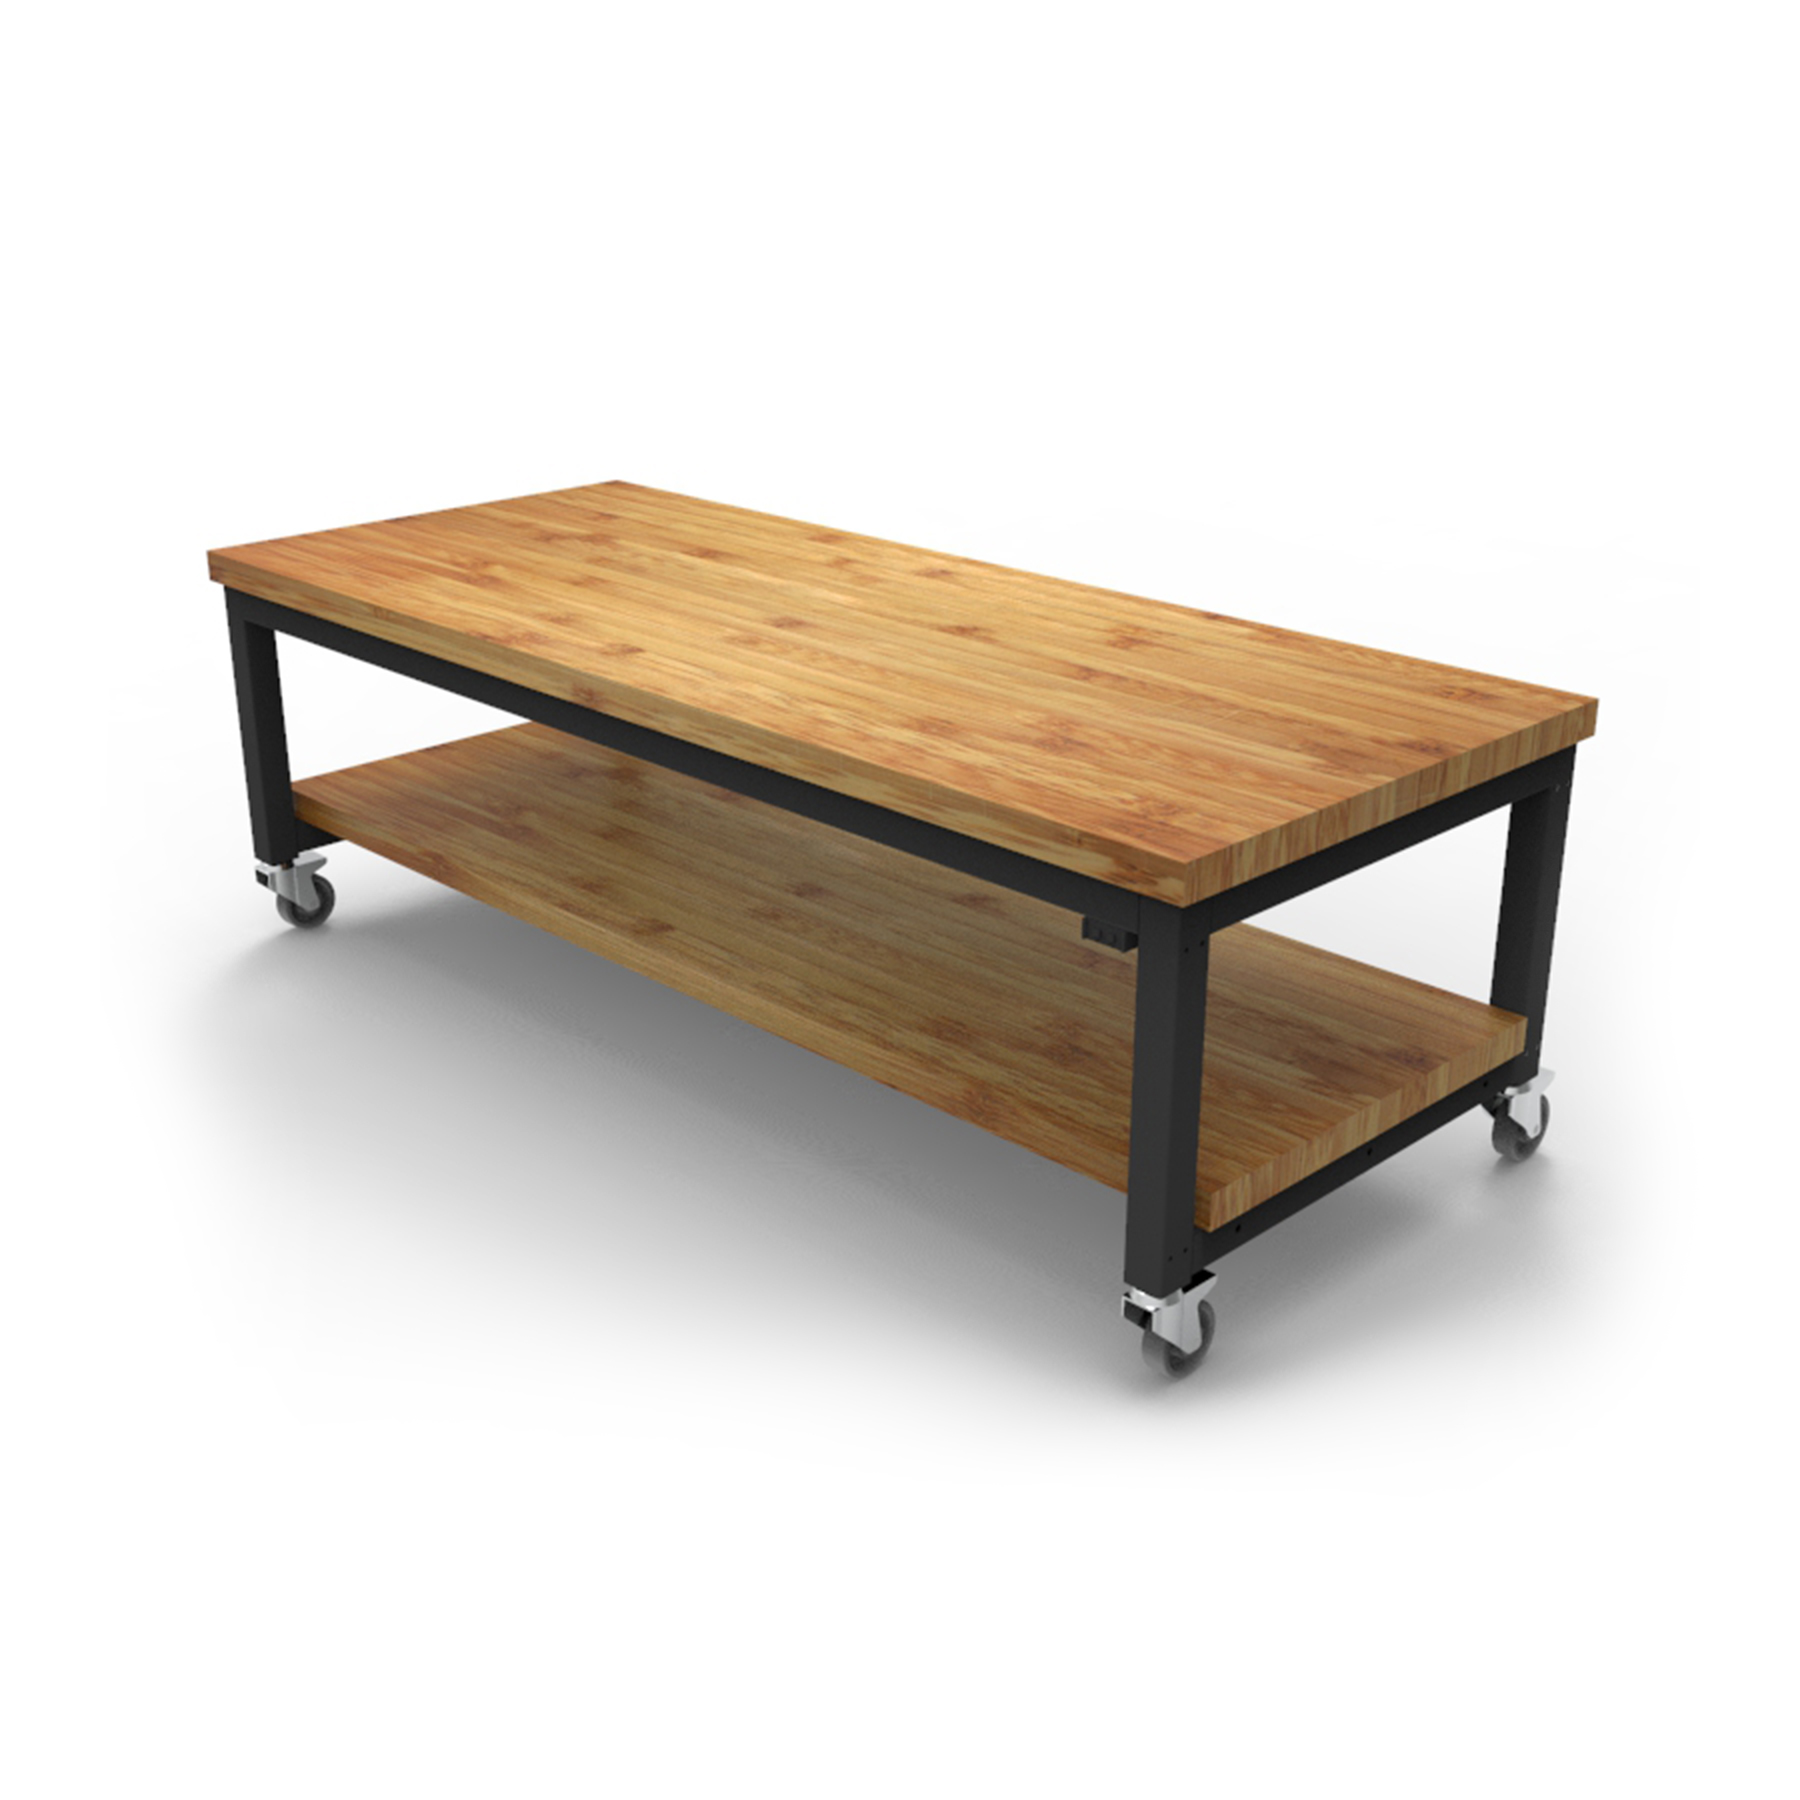 rectangular height adjustable table with an extra bottom shelf for storage